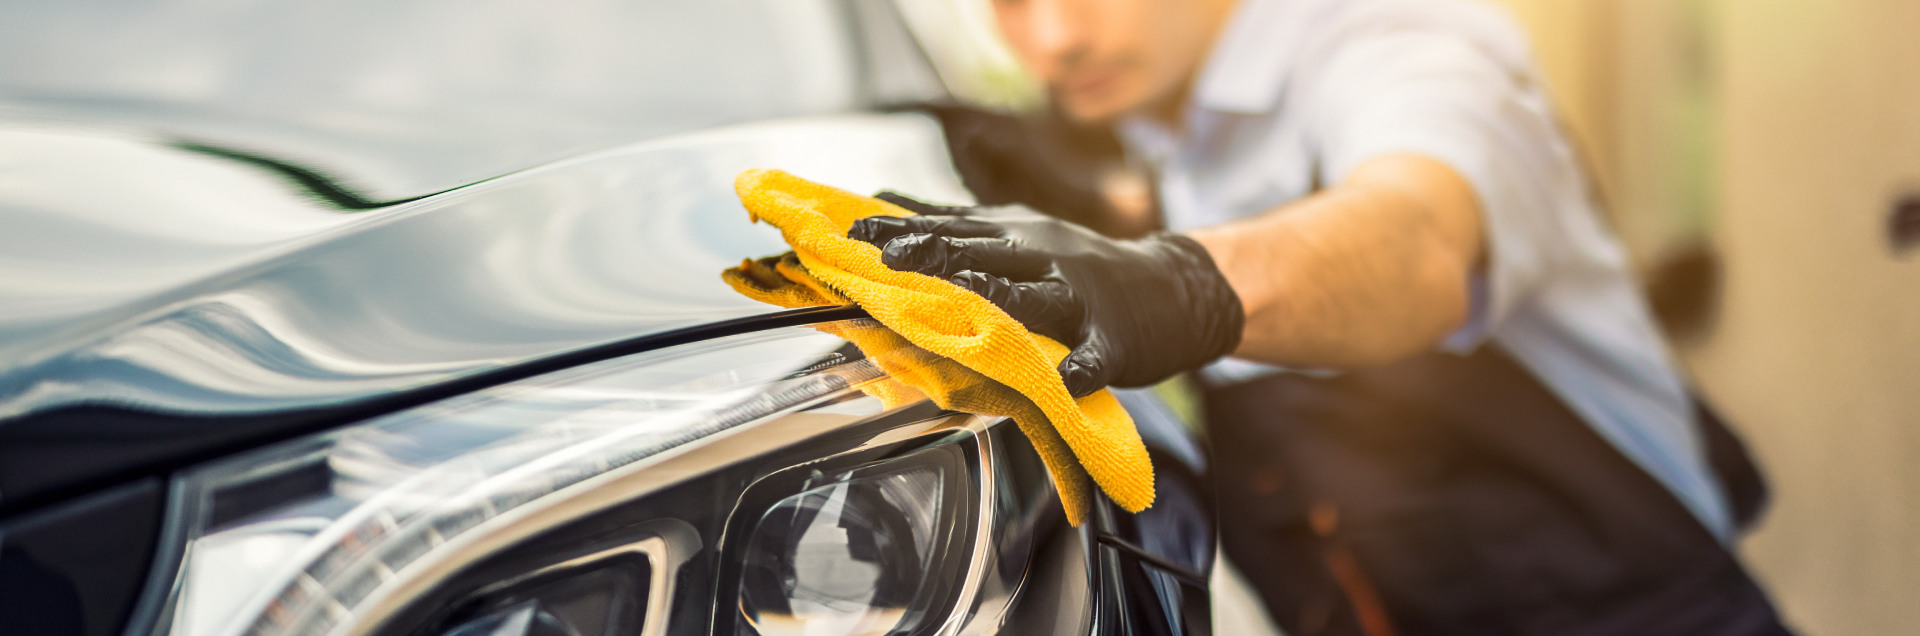 10 Compelling Reasons for Getting Your Car Detailed